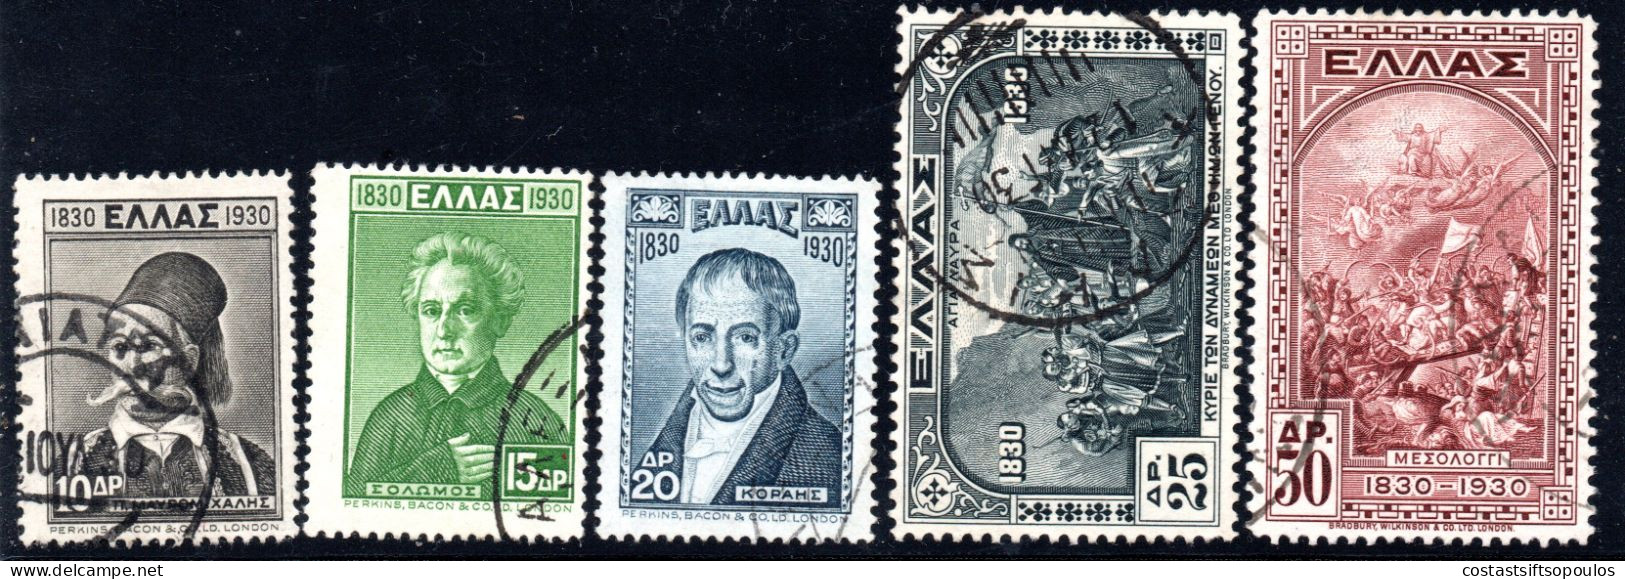 2954. GREECE.1930 INDEPENDENCE(HEROES) HIGH VALUES 10 DR-50 DR.HELLAS 504-508. - Usati